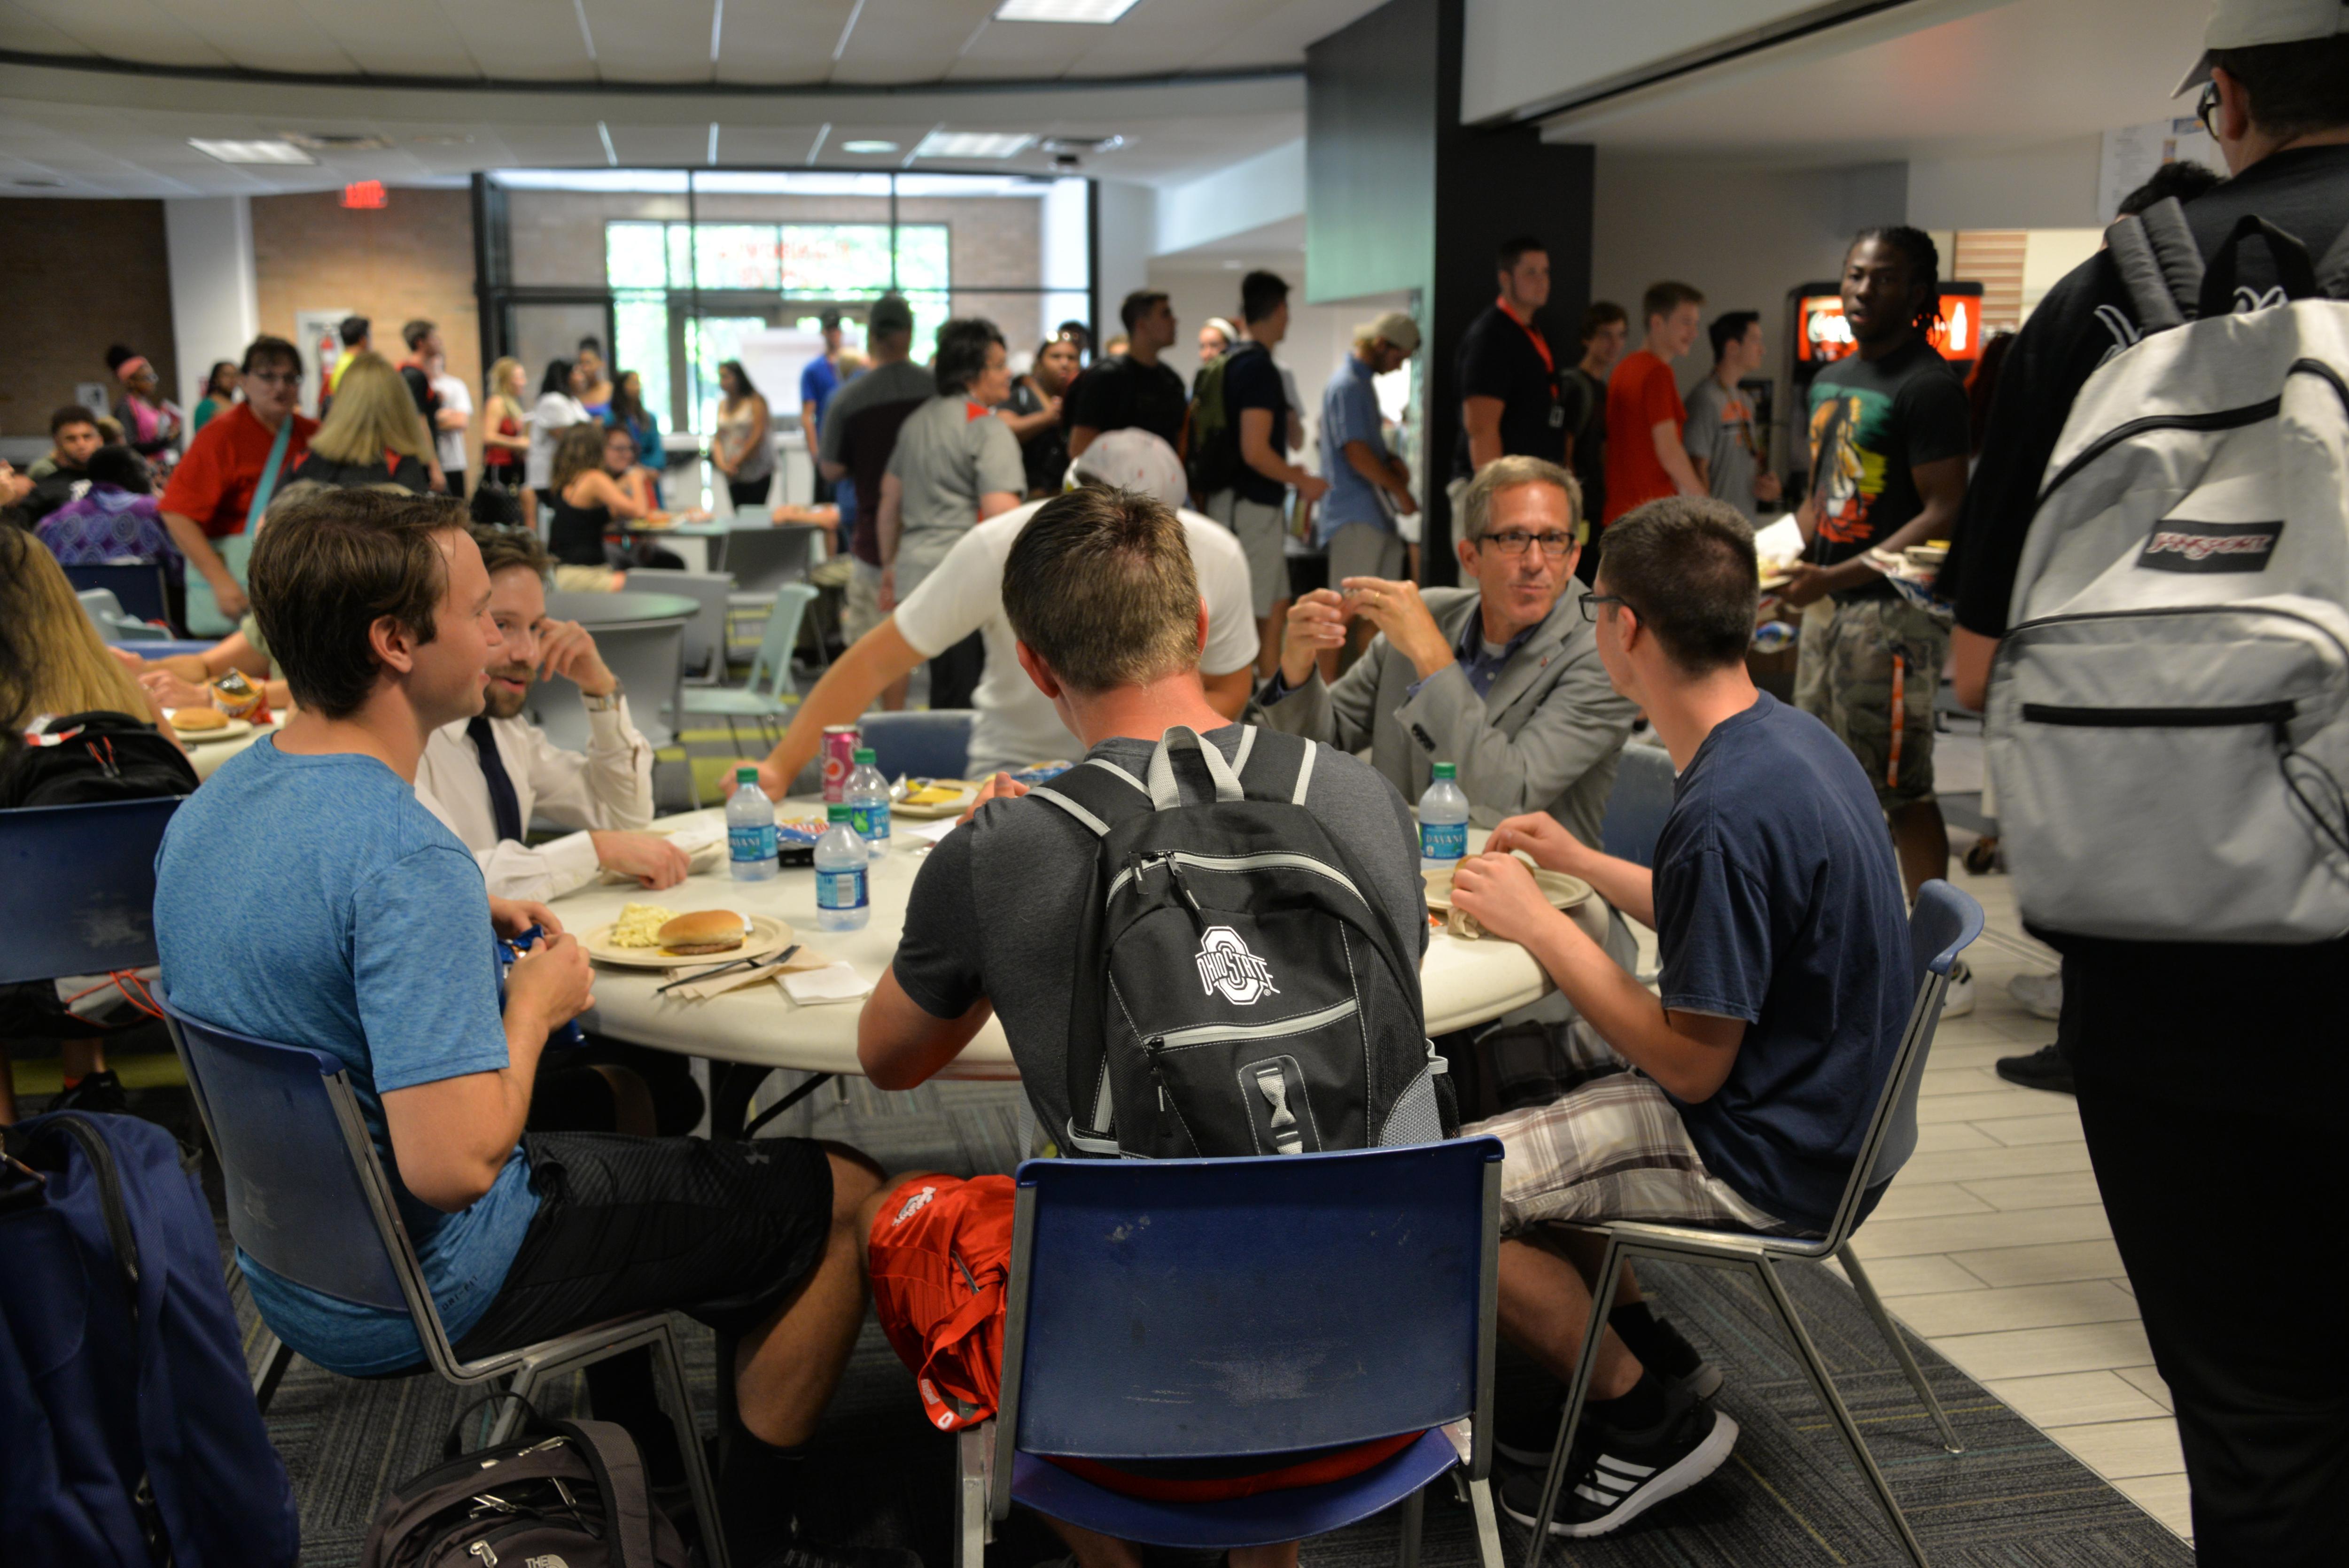 three separate images of students using campus dining facilities